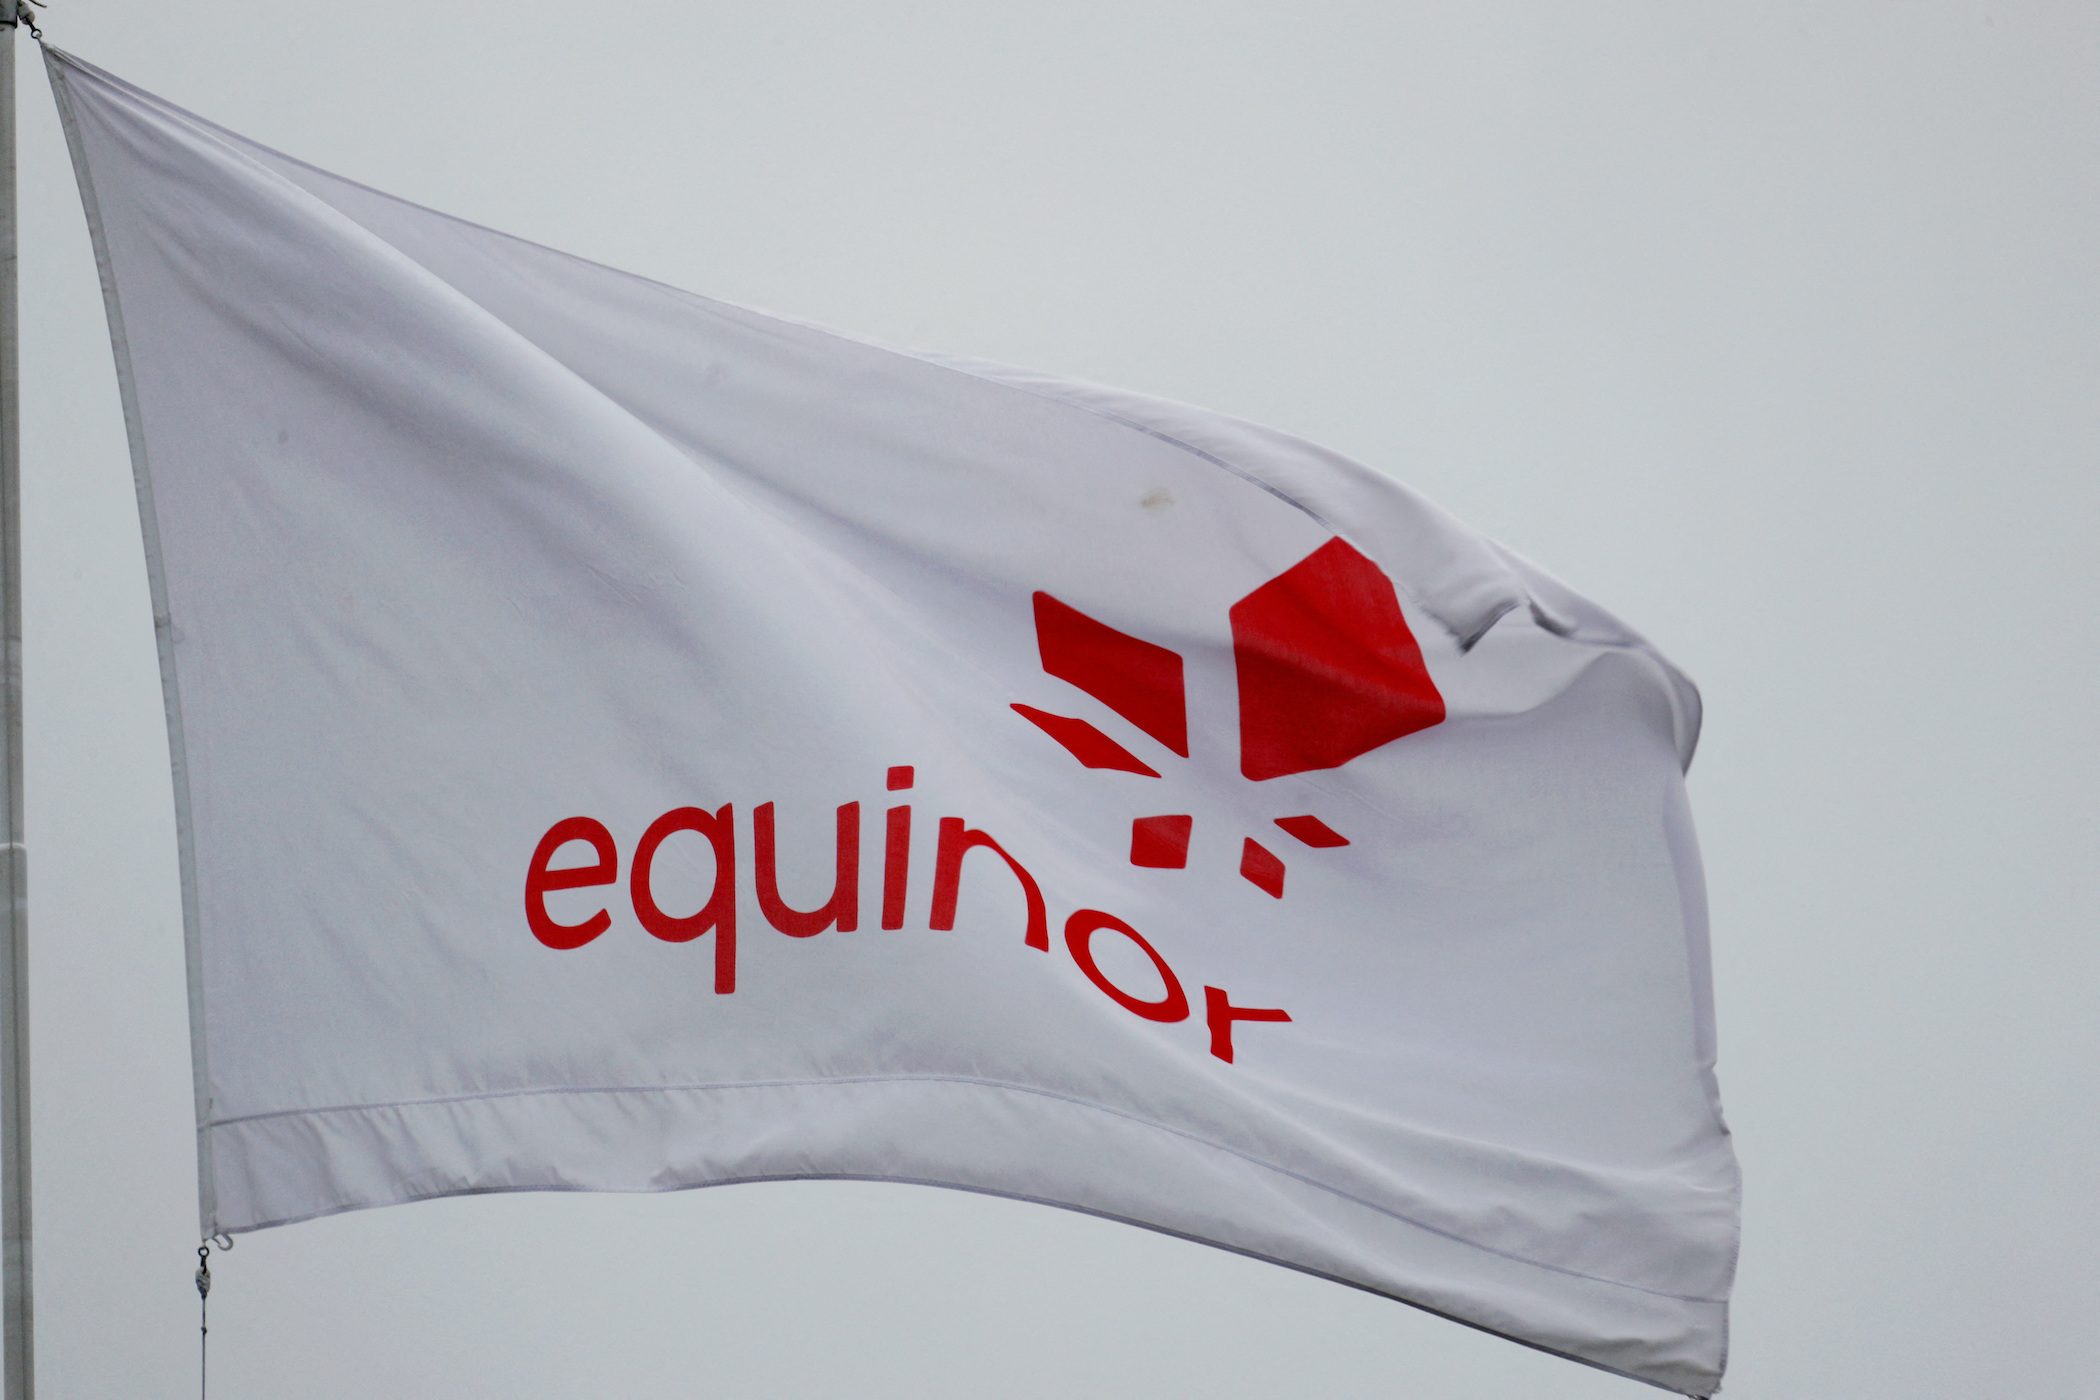 Norwegian energy group Equinor completes Russia exit